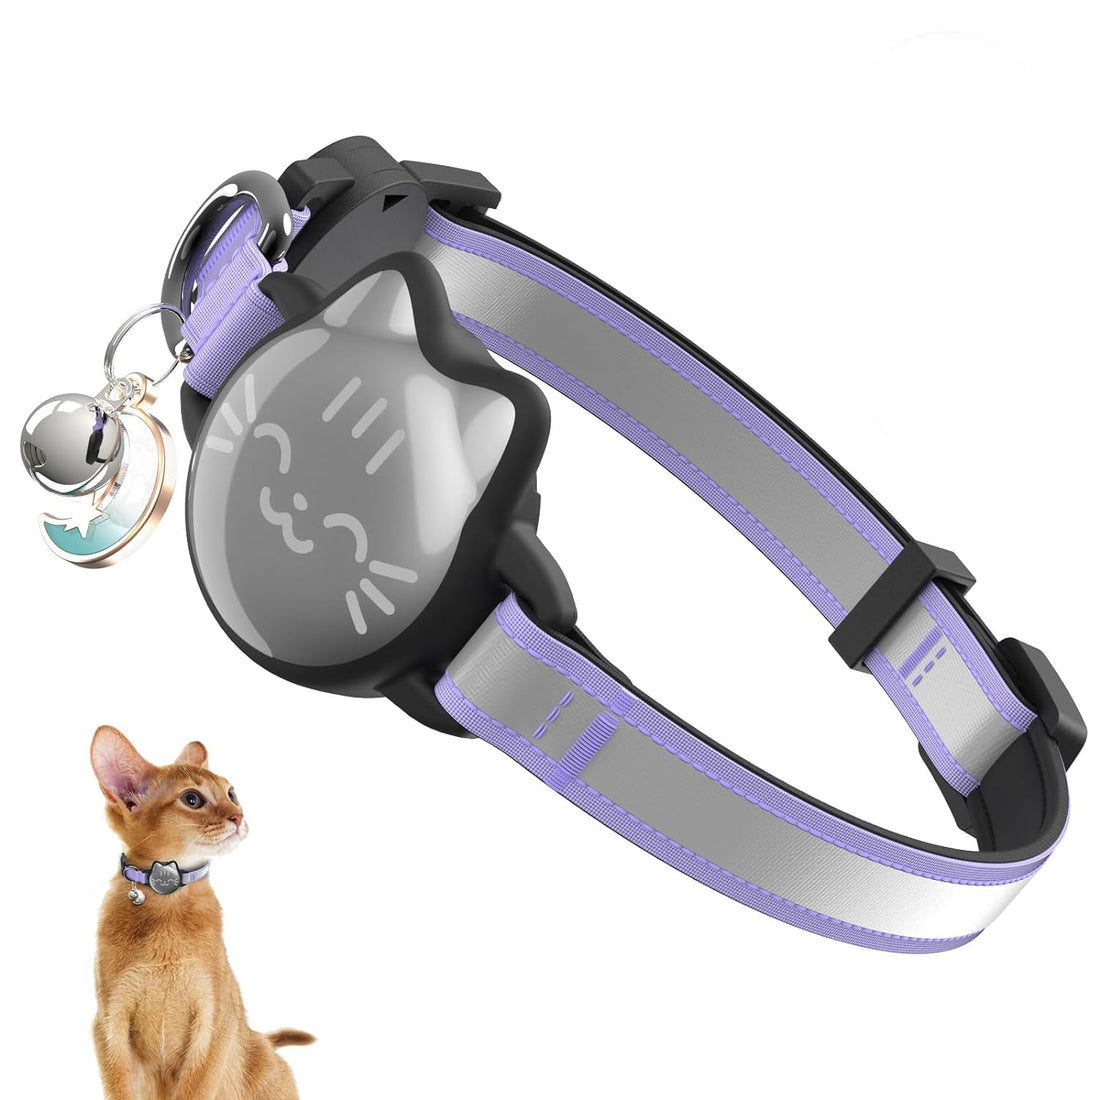 Cat Collar with Airtag Holder, Breakaway Cat Airtag Collar with Reflective Strap, Lightweight Kitten Collar for Apple Air tag, Hidden GPS Tracker Holder for Boy Girl Cats, Kittens, Puppies (9-13")